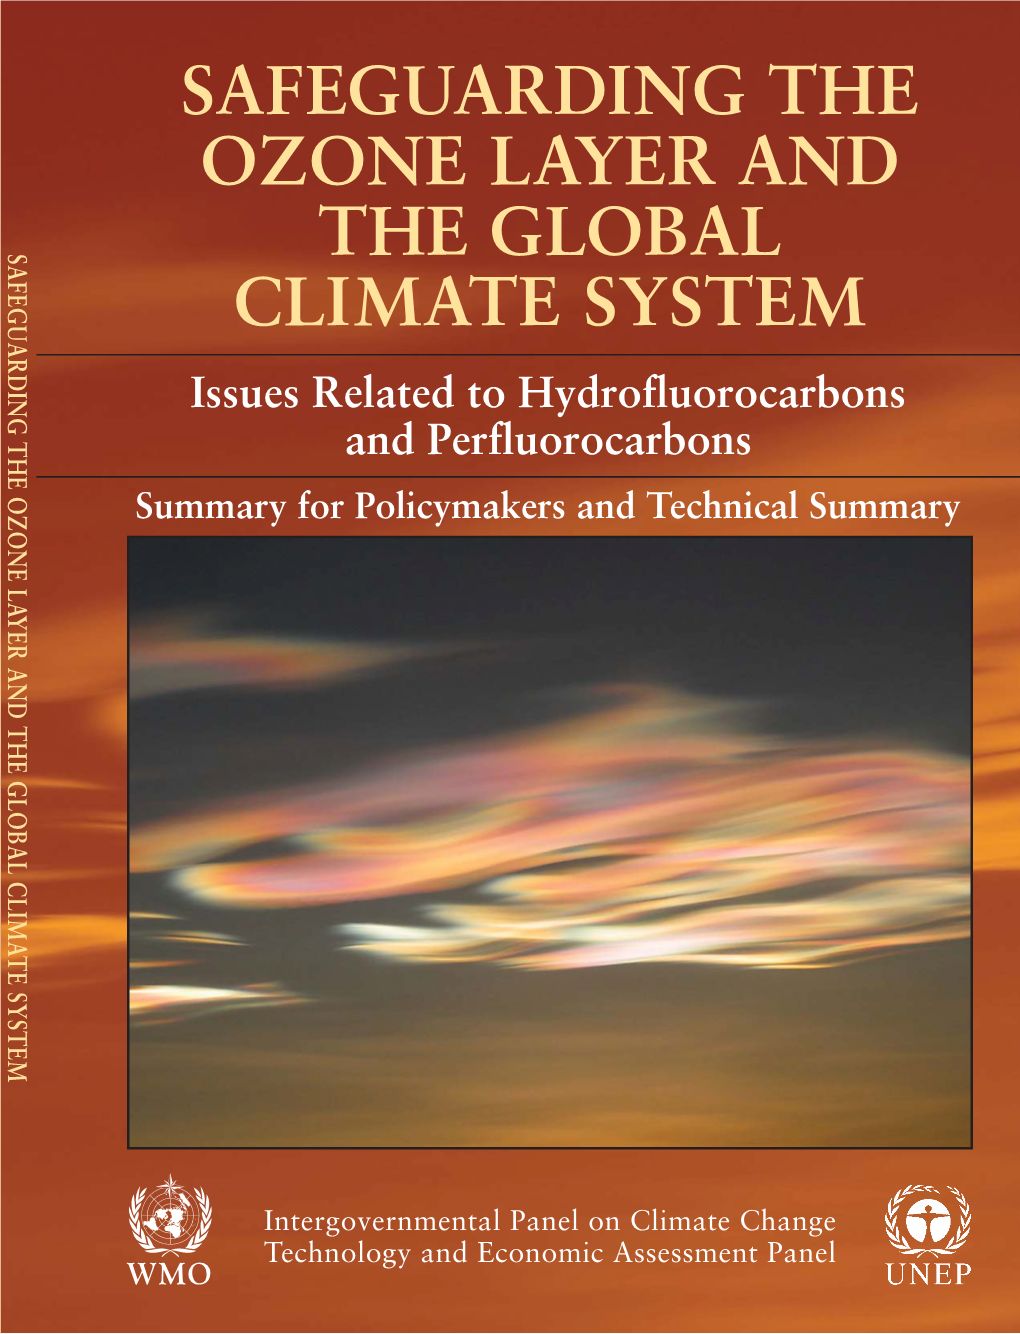 Safeguarding the Ozone Layer and the Global Climate System: Issues Related to Hydroﬂ Uorocarbons and Perﬂ Uorocarbons